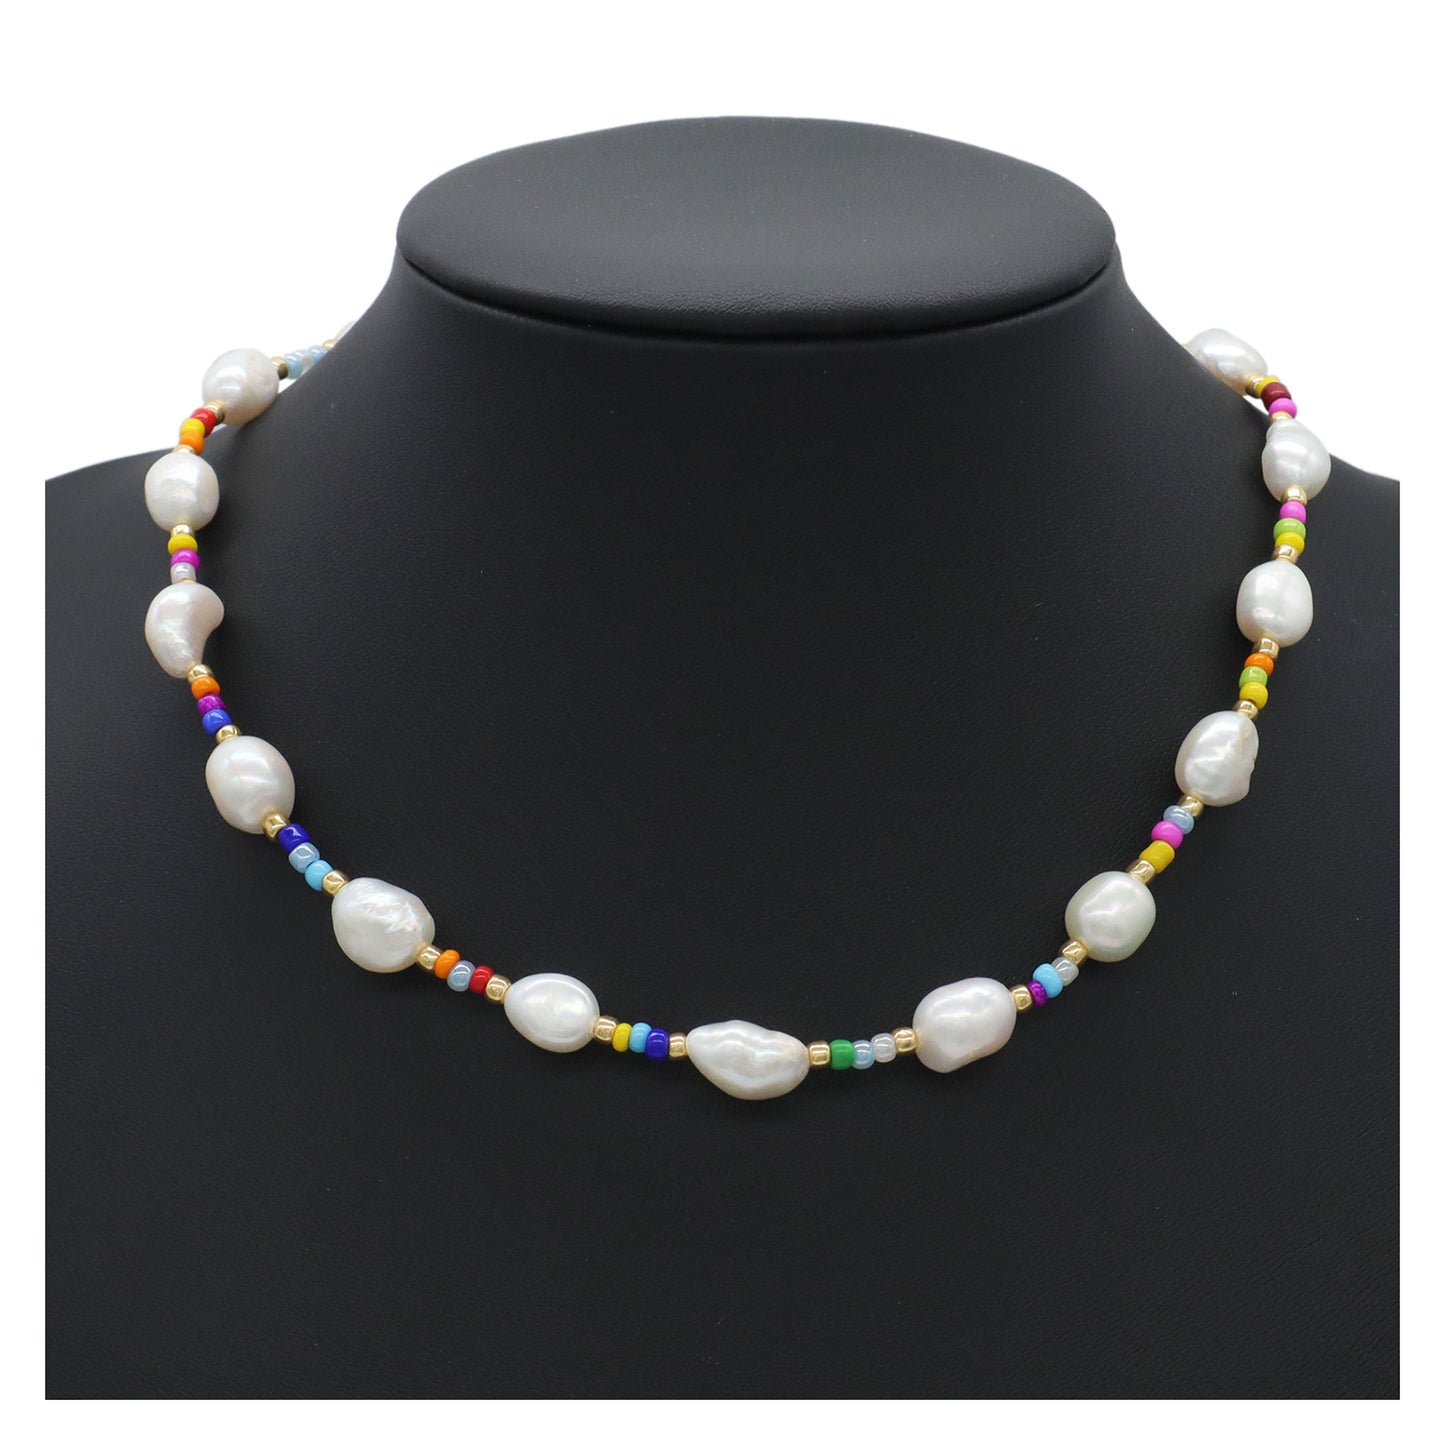 Wholesale Custom Ajustable Colorful Miyuki Seed beads Choker Necklace OEM Factory Manufacture Handmade Freshwater Pearl Necklace for Jewelry Making